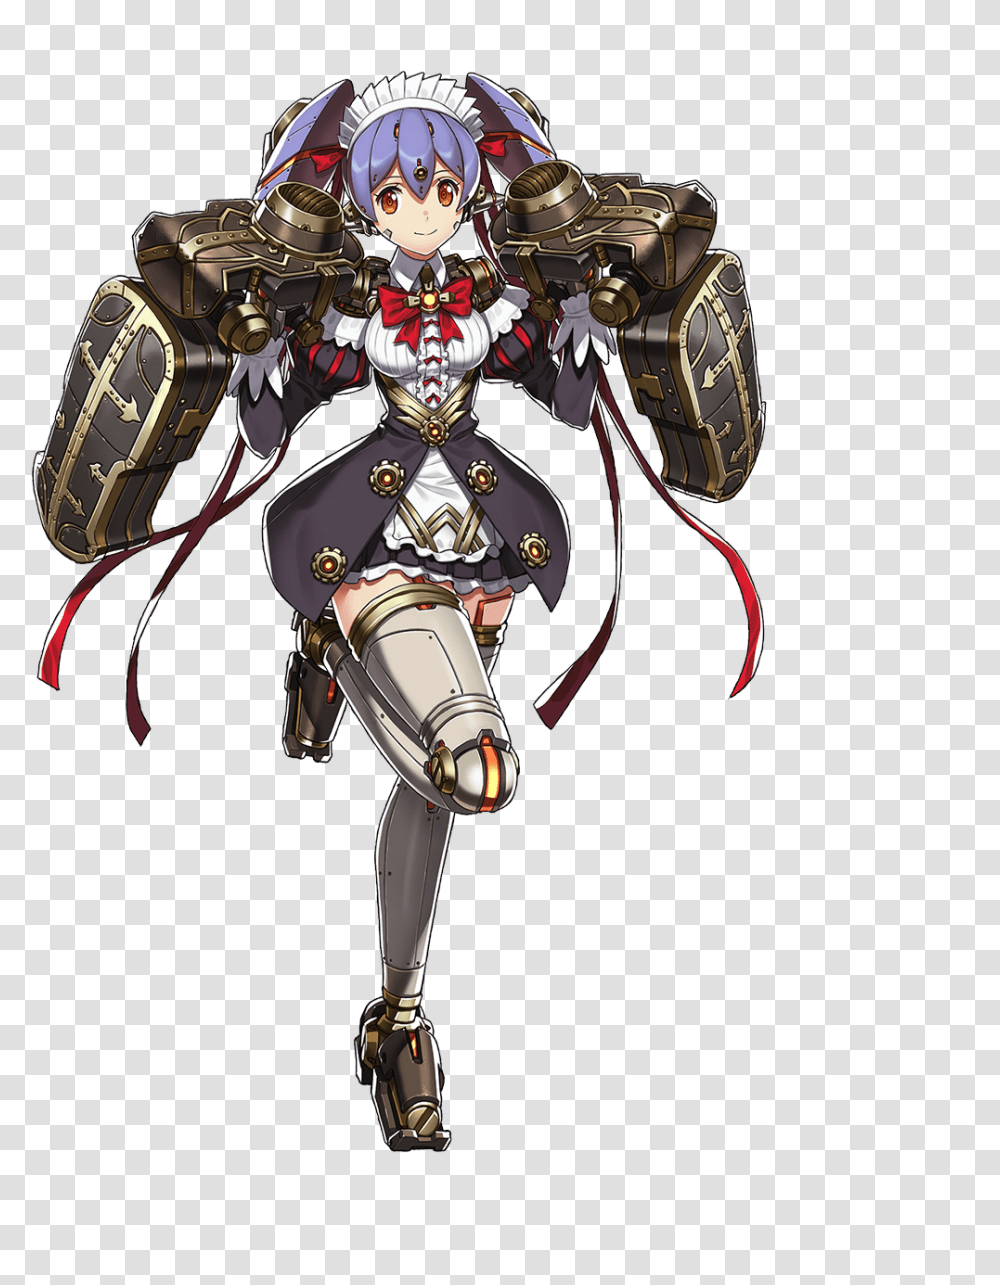 Image Id Xenoblade Chronicles 2 Poppi Qt, Knight, Armor, Toy, Samurai Transparent Png